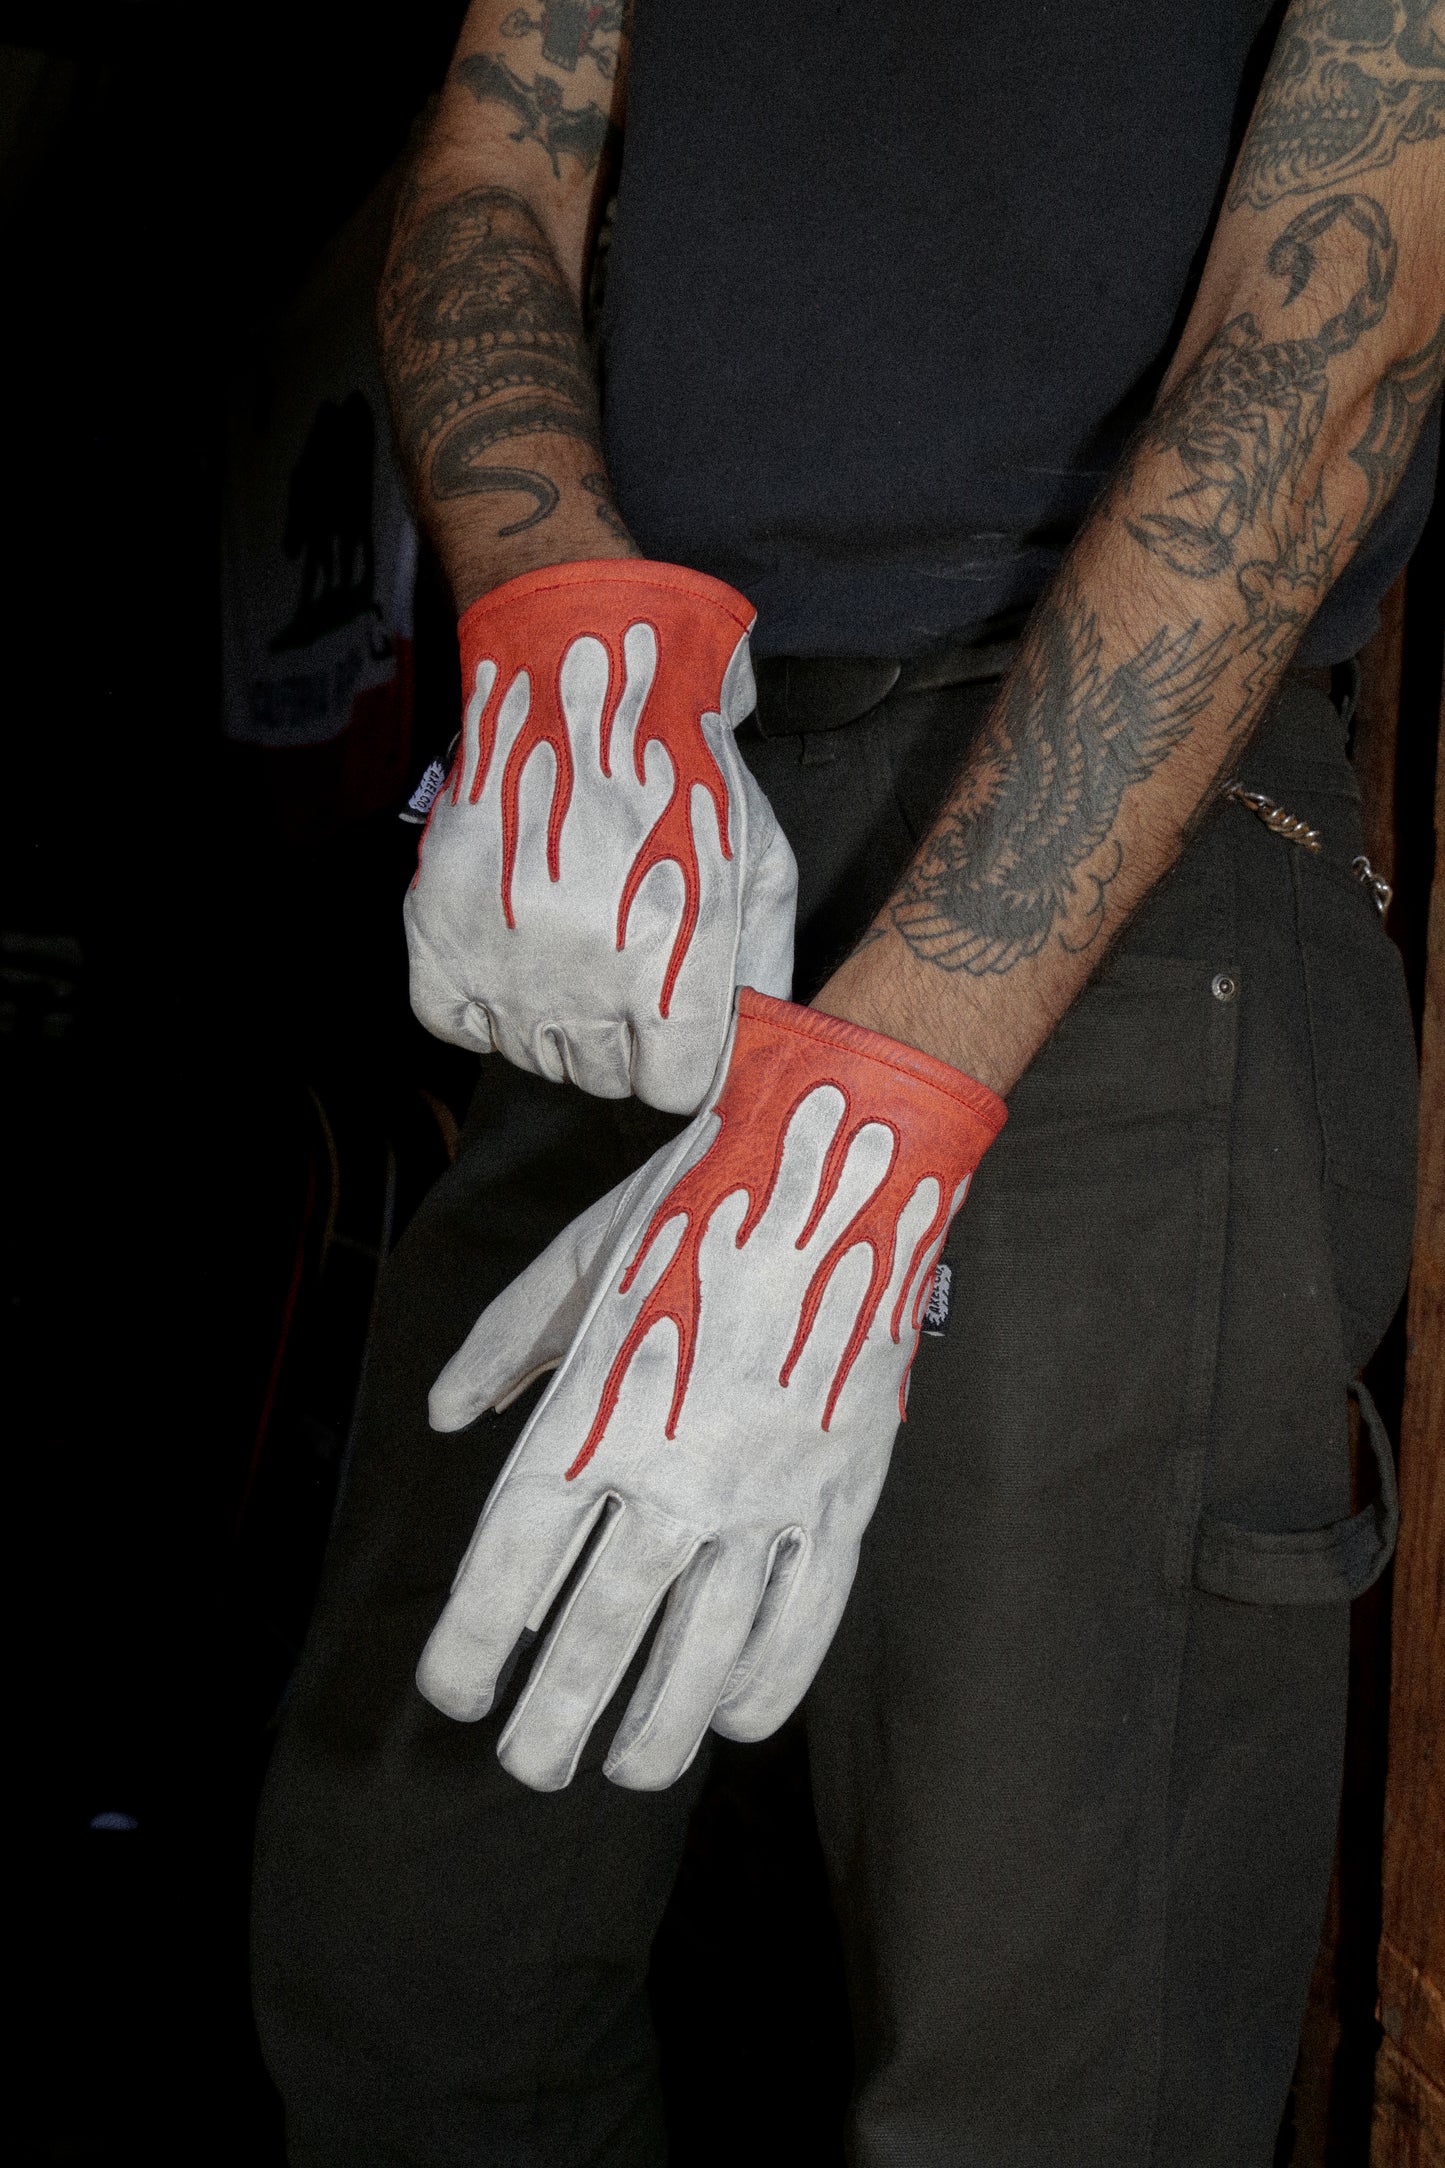 Axel Co Red Flame White Motorcycle Gloves